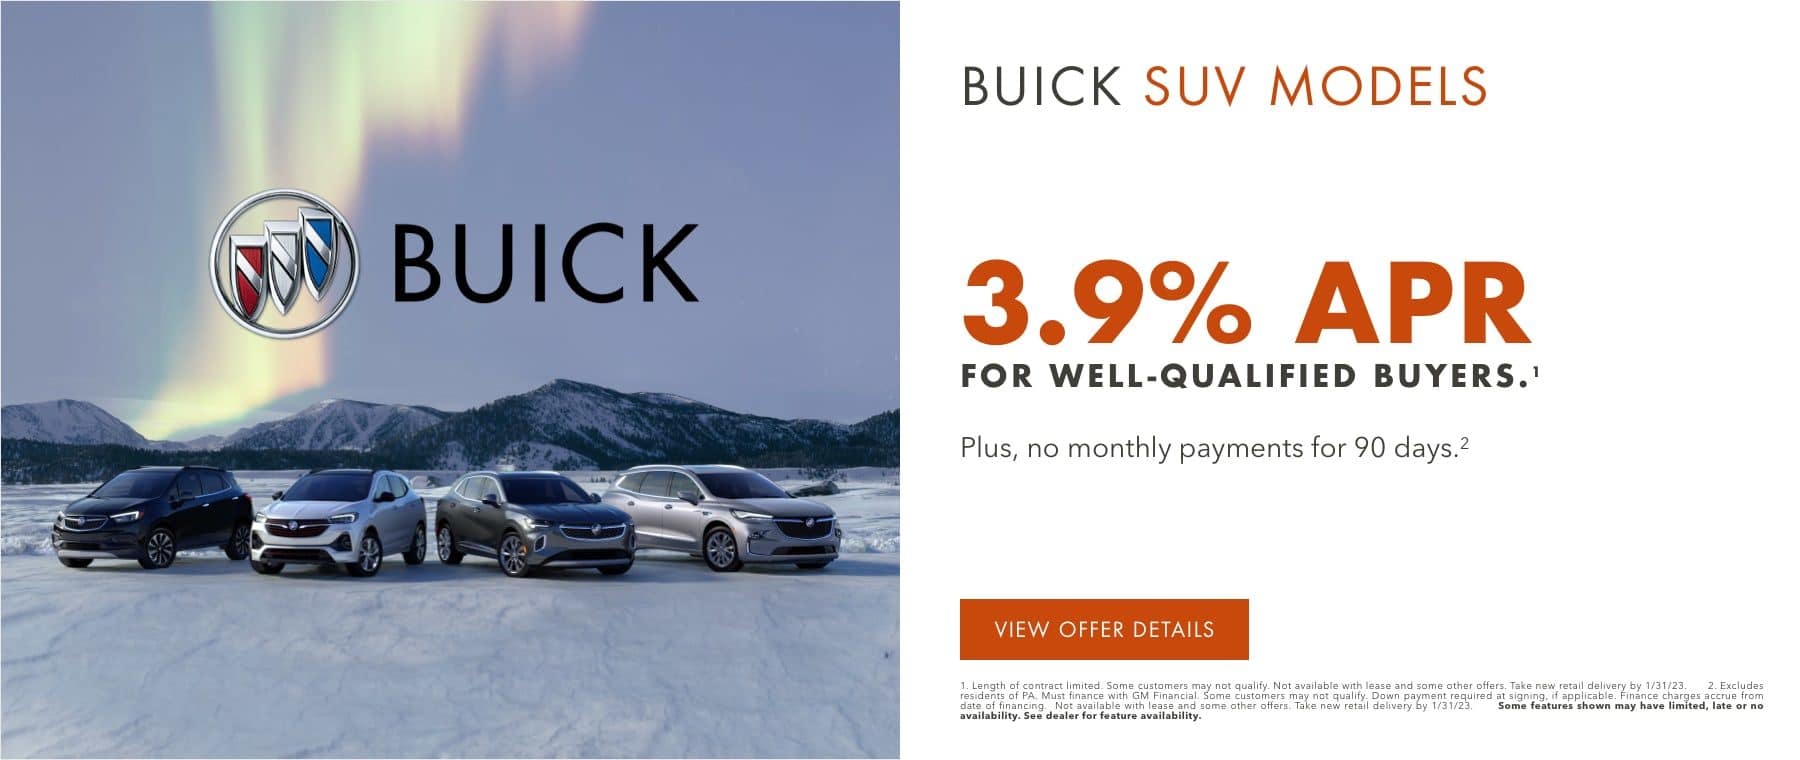 3.9% APR for well-qualified buyers.1 PLUS, NO MONTHLY PAYMENTS FOR 90 DAYS.2